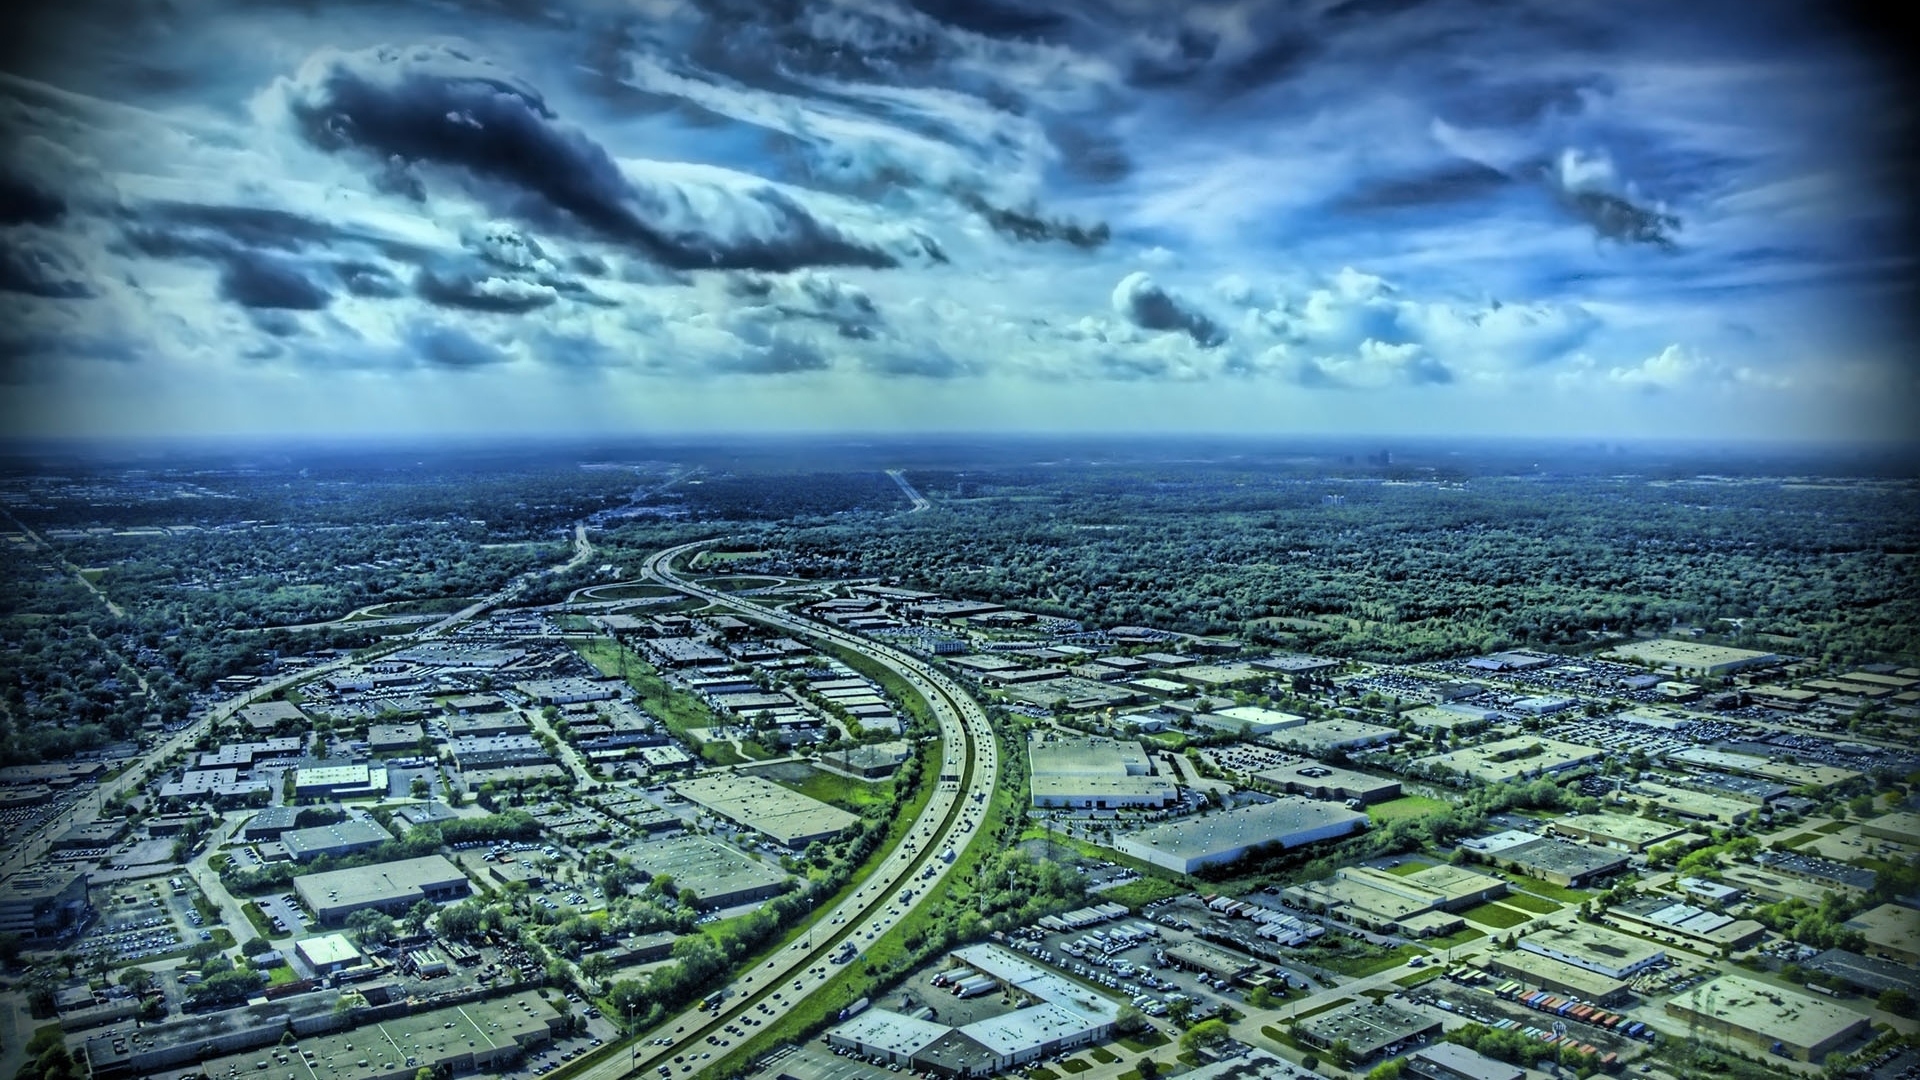 General 1920x1080 cityscape highway city clouds sky road car